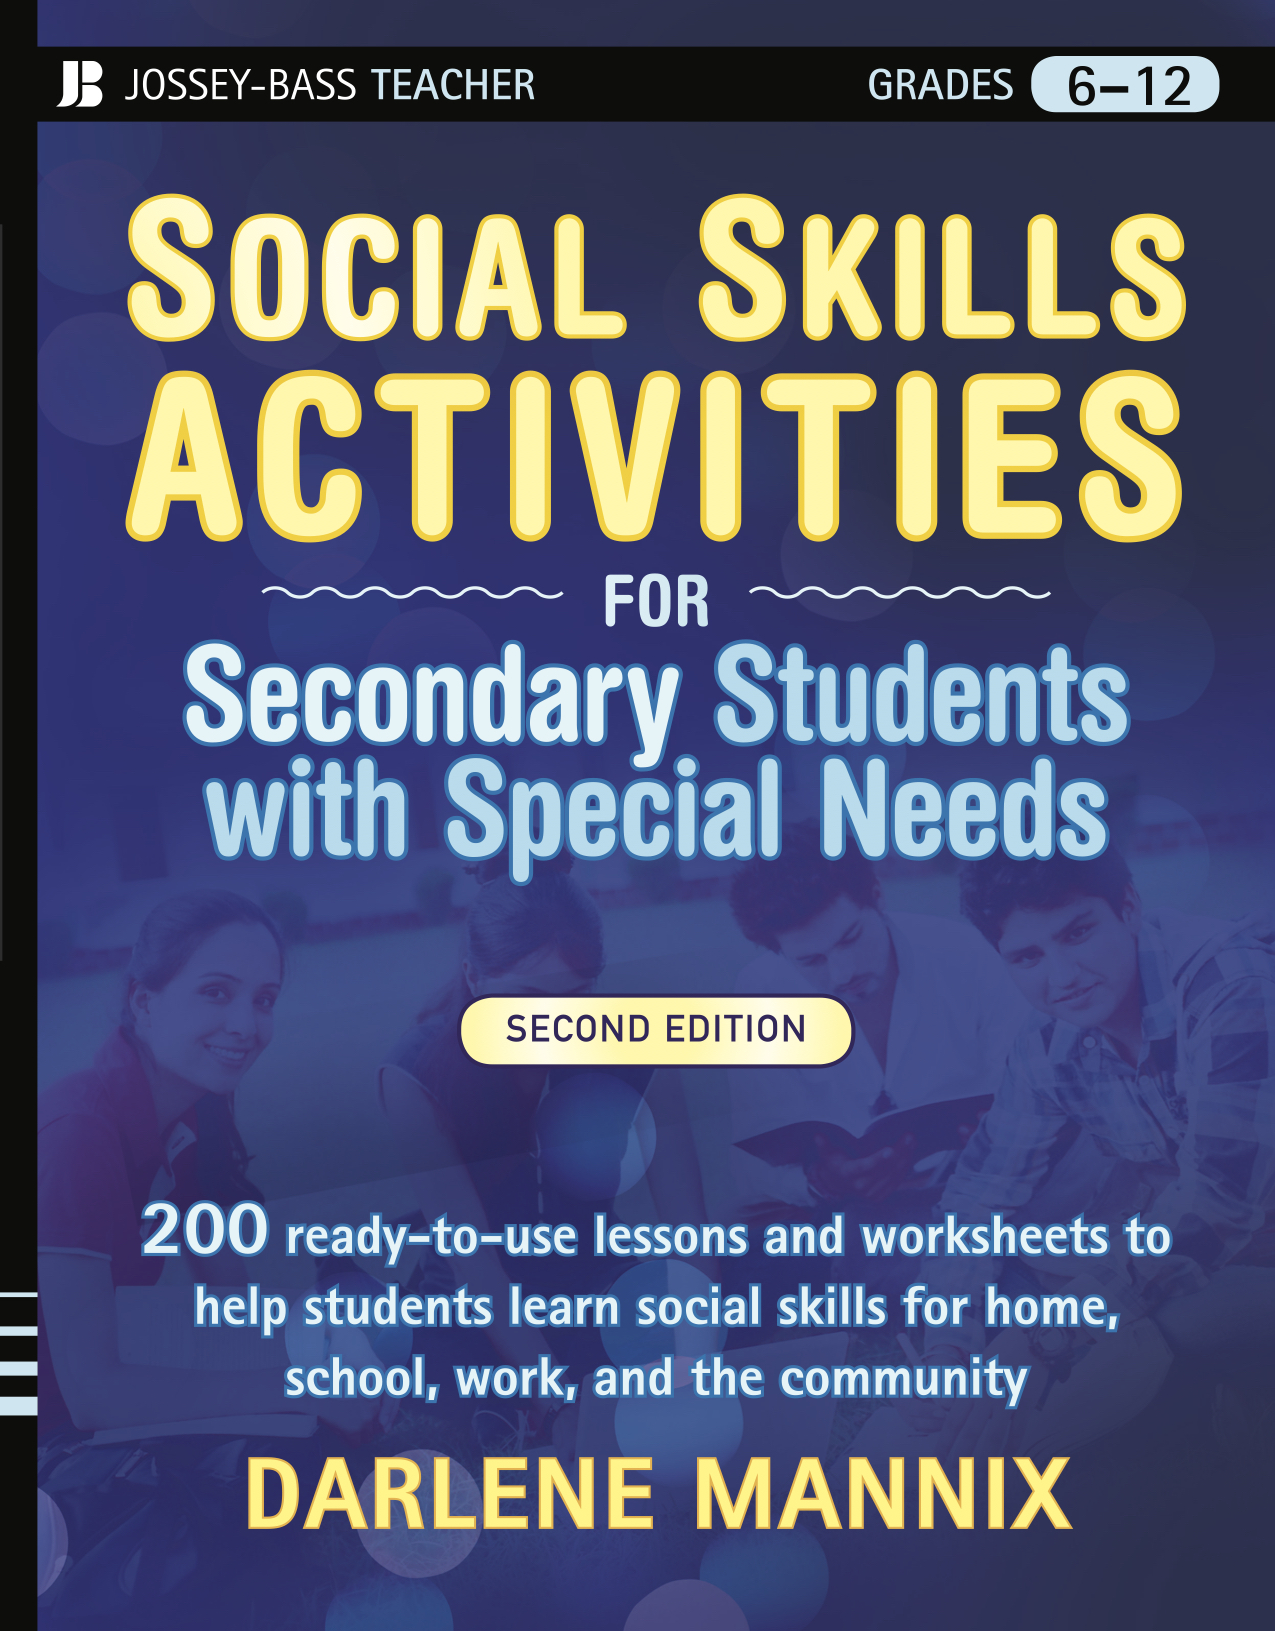 nrcys-social-skills-activities-for-secondary-students-with-special-needs